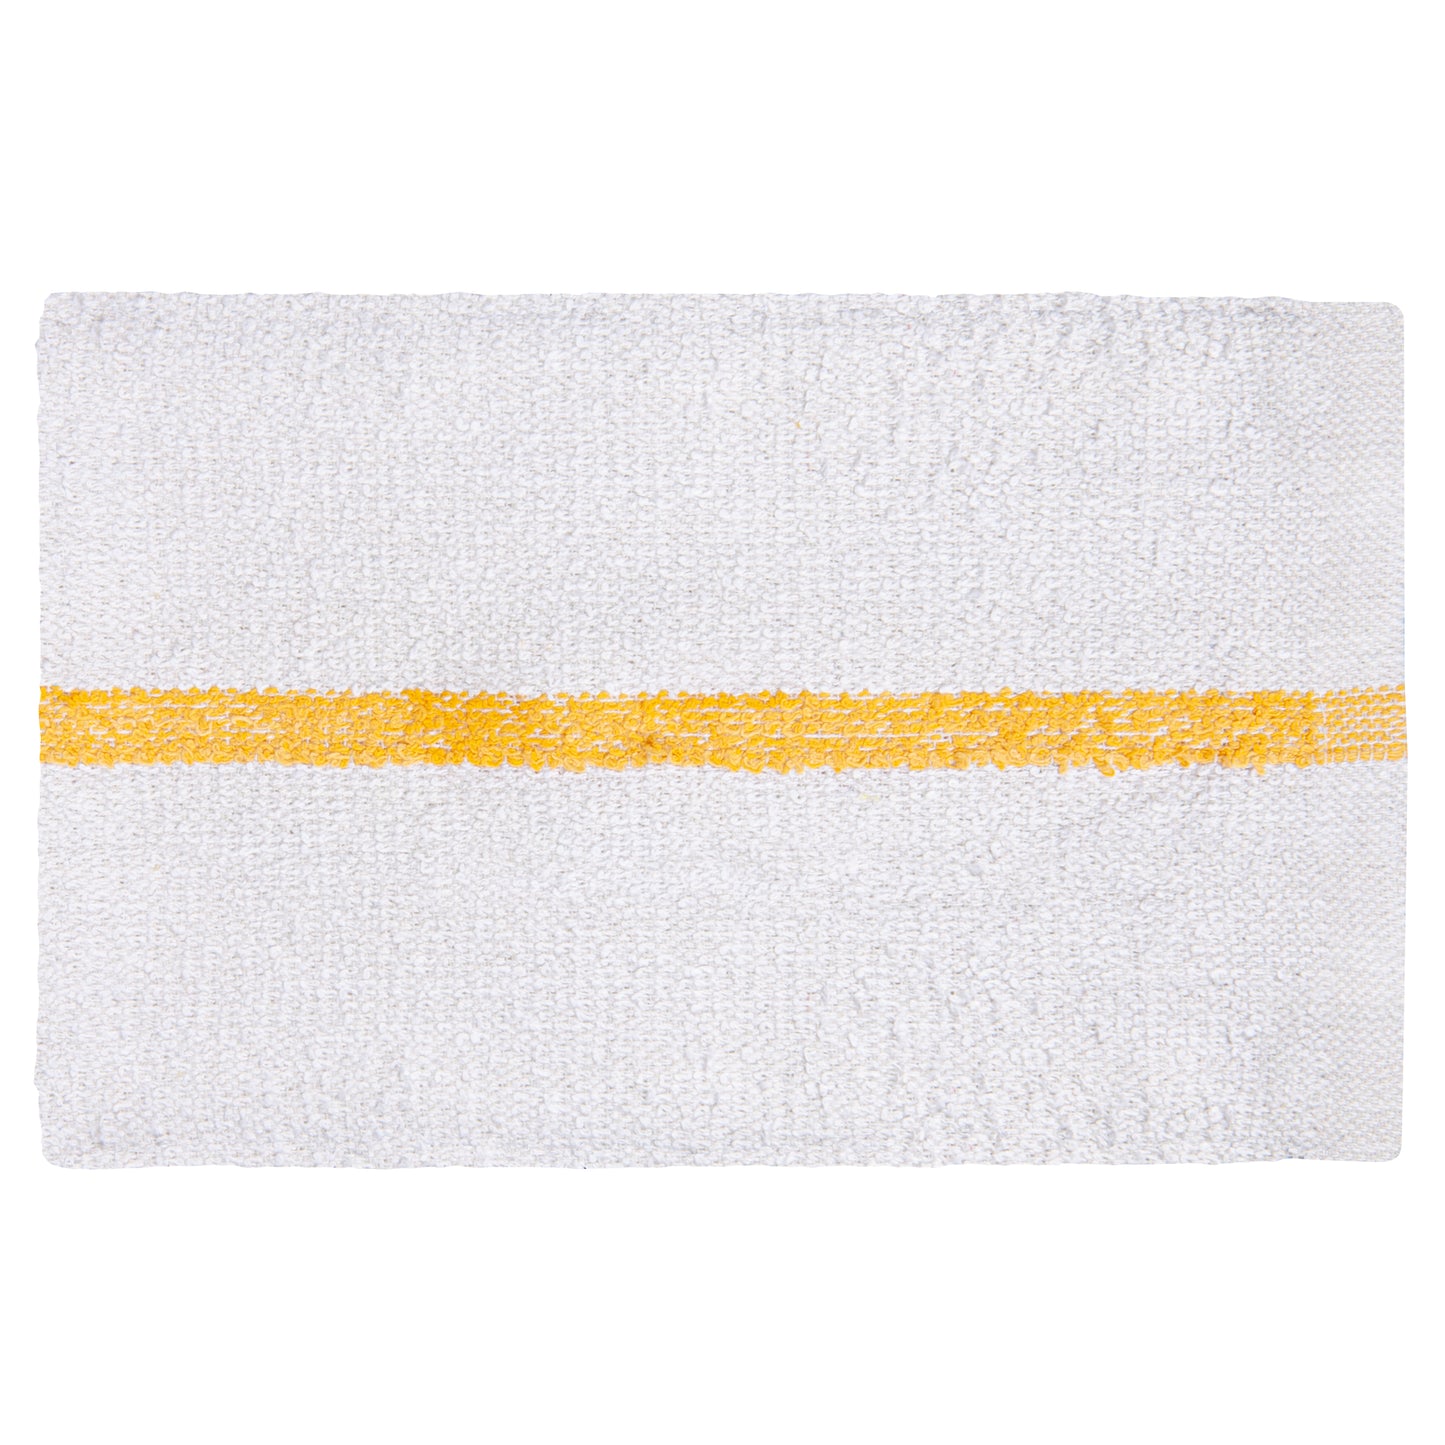 Bar Mop Towel, 16x19 inch, White with Gold Center Stripe